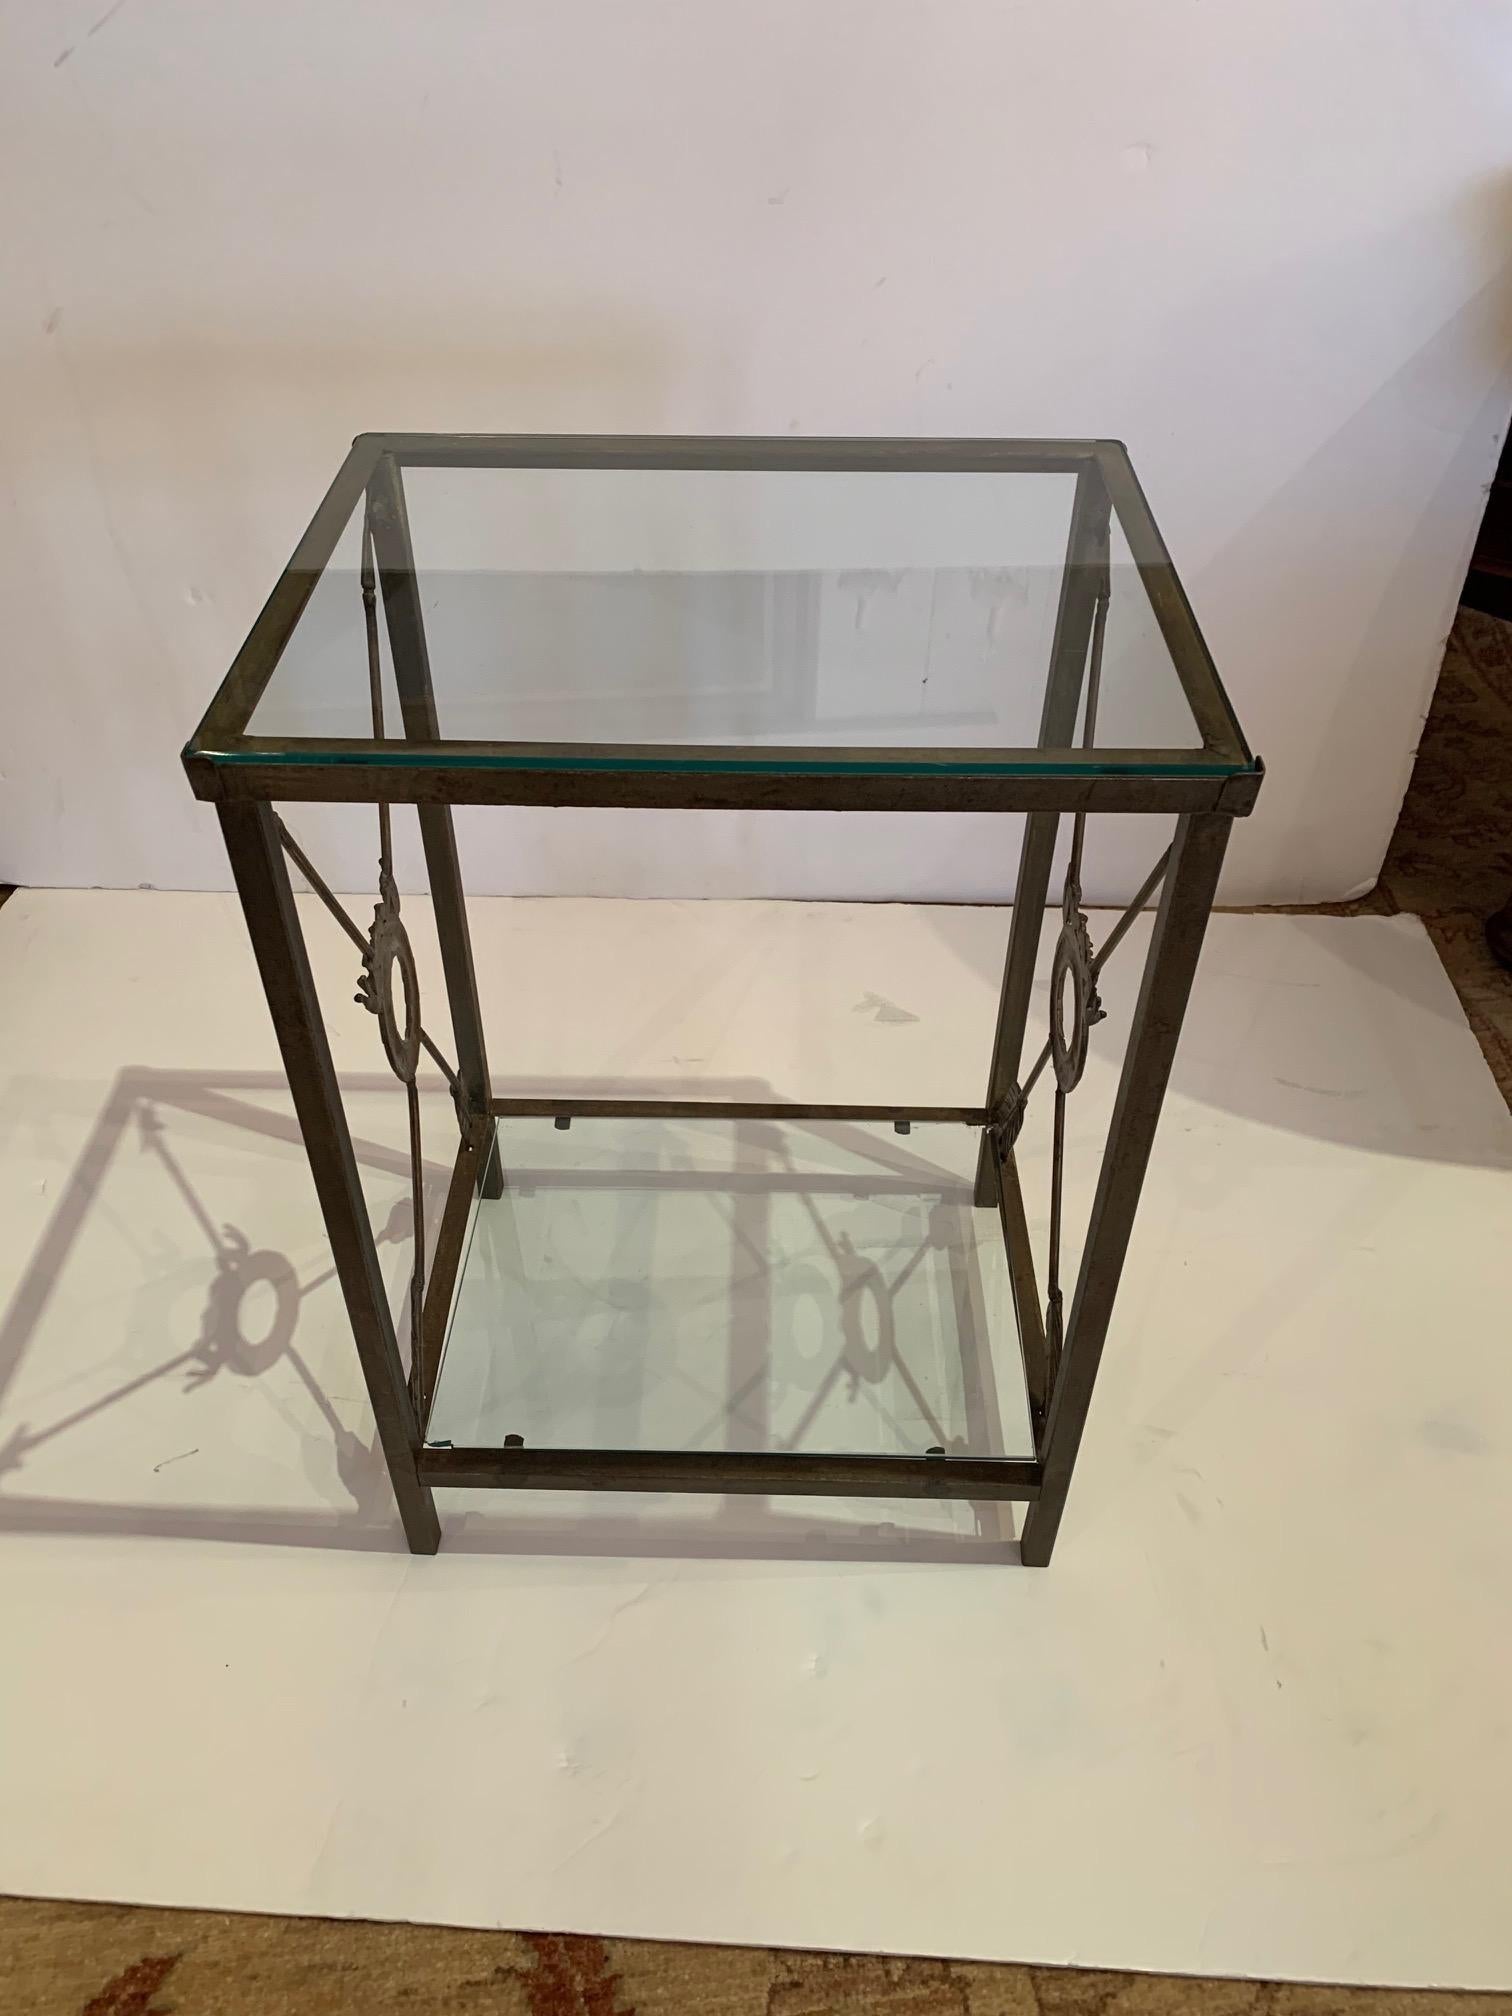 A versatile medium sized two-tier end table having aged metal frame with arrows in a neoclassical or Empire style. The two tiers are glass.